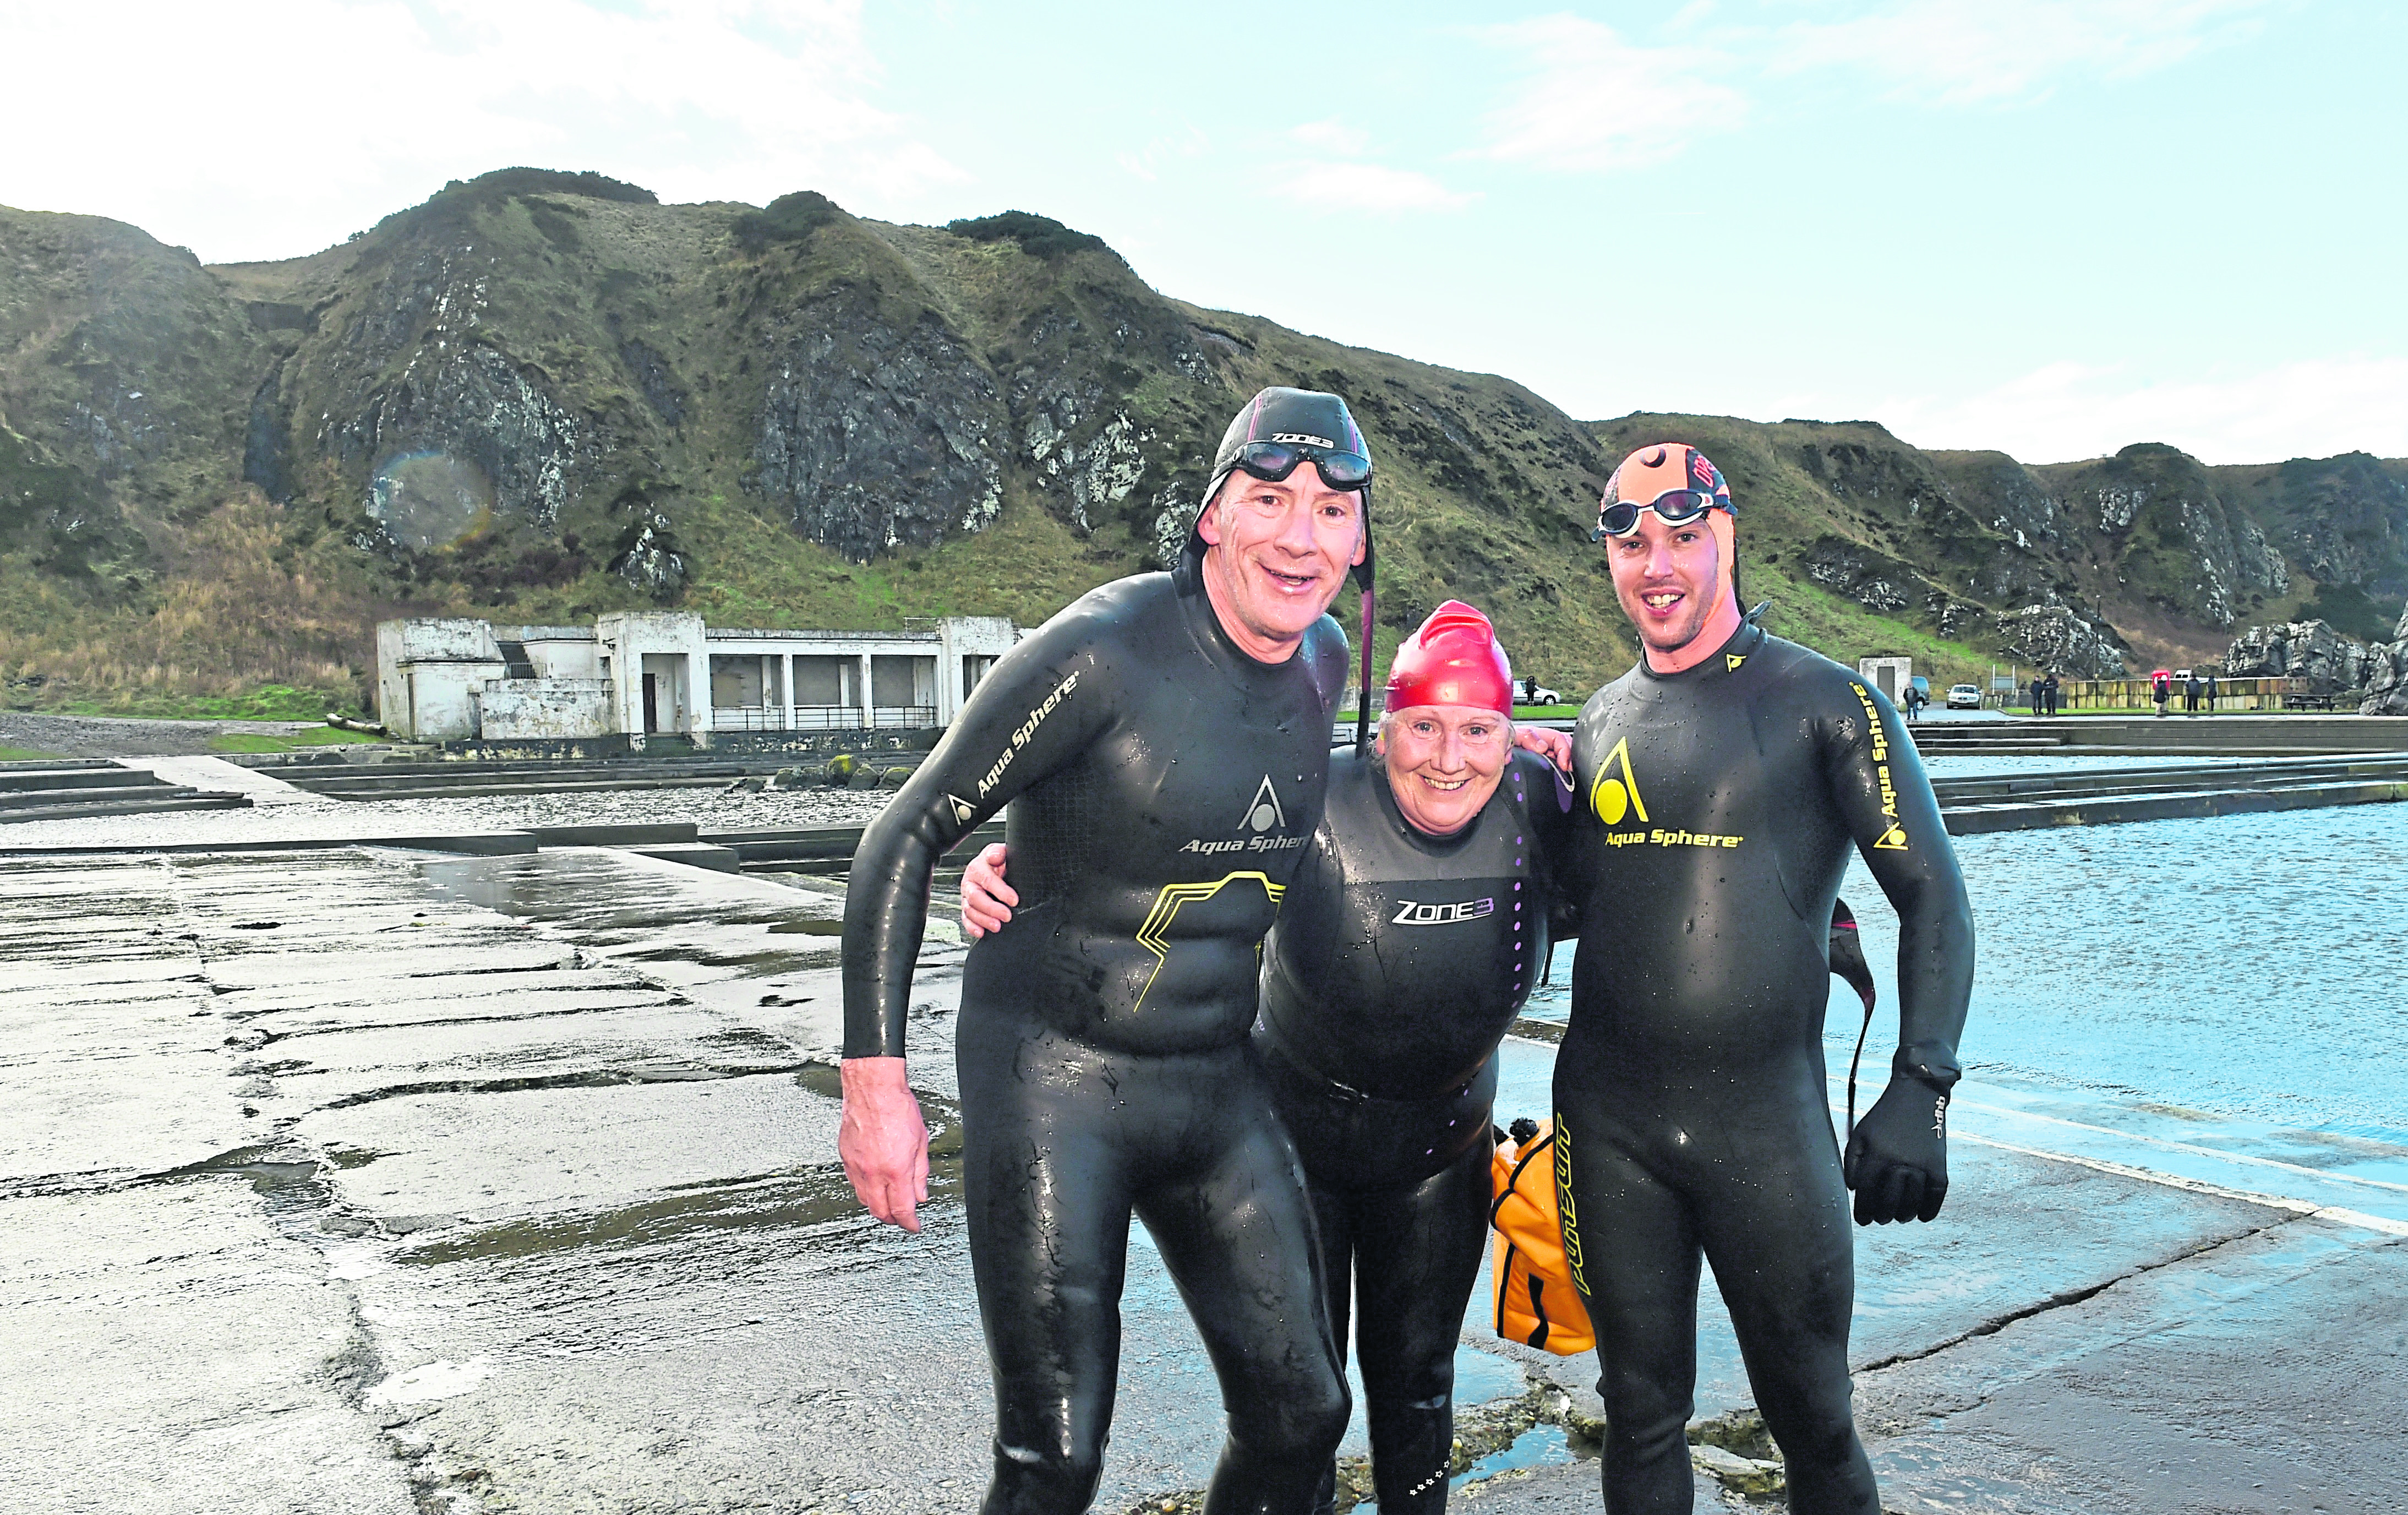 George Jamieson, Helen Manson and Wayne Headherill, who braved the North Sea, swimming over a mile from the Macduff Aquarium to Tarlair outdoor pool to raise money for the Tarlair pool.